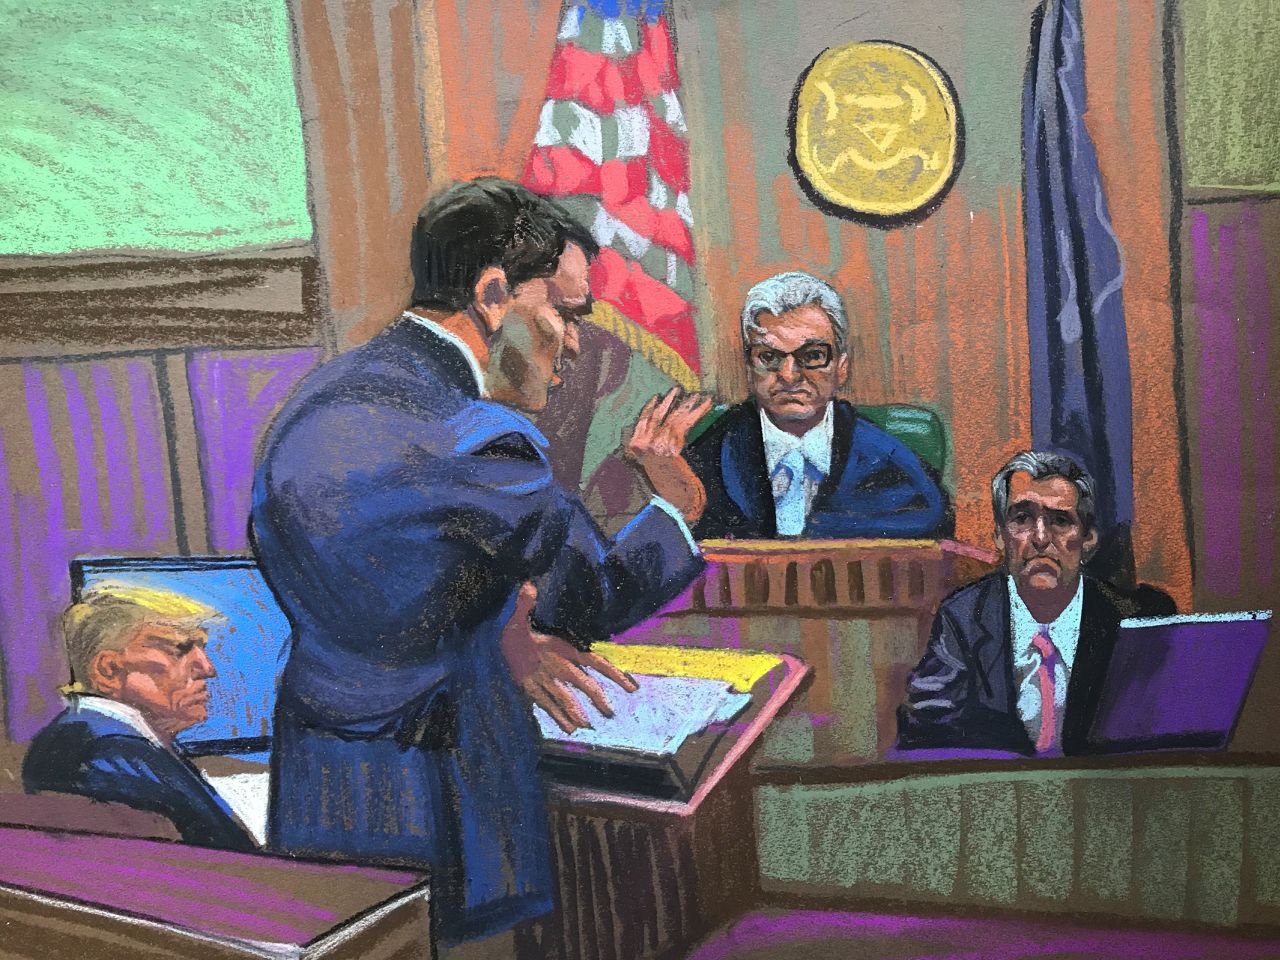 This sketch from court shows attorney Todd Blanche continuing his cross-examination of Michael Cohen on Monday.